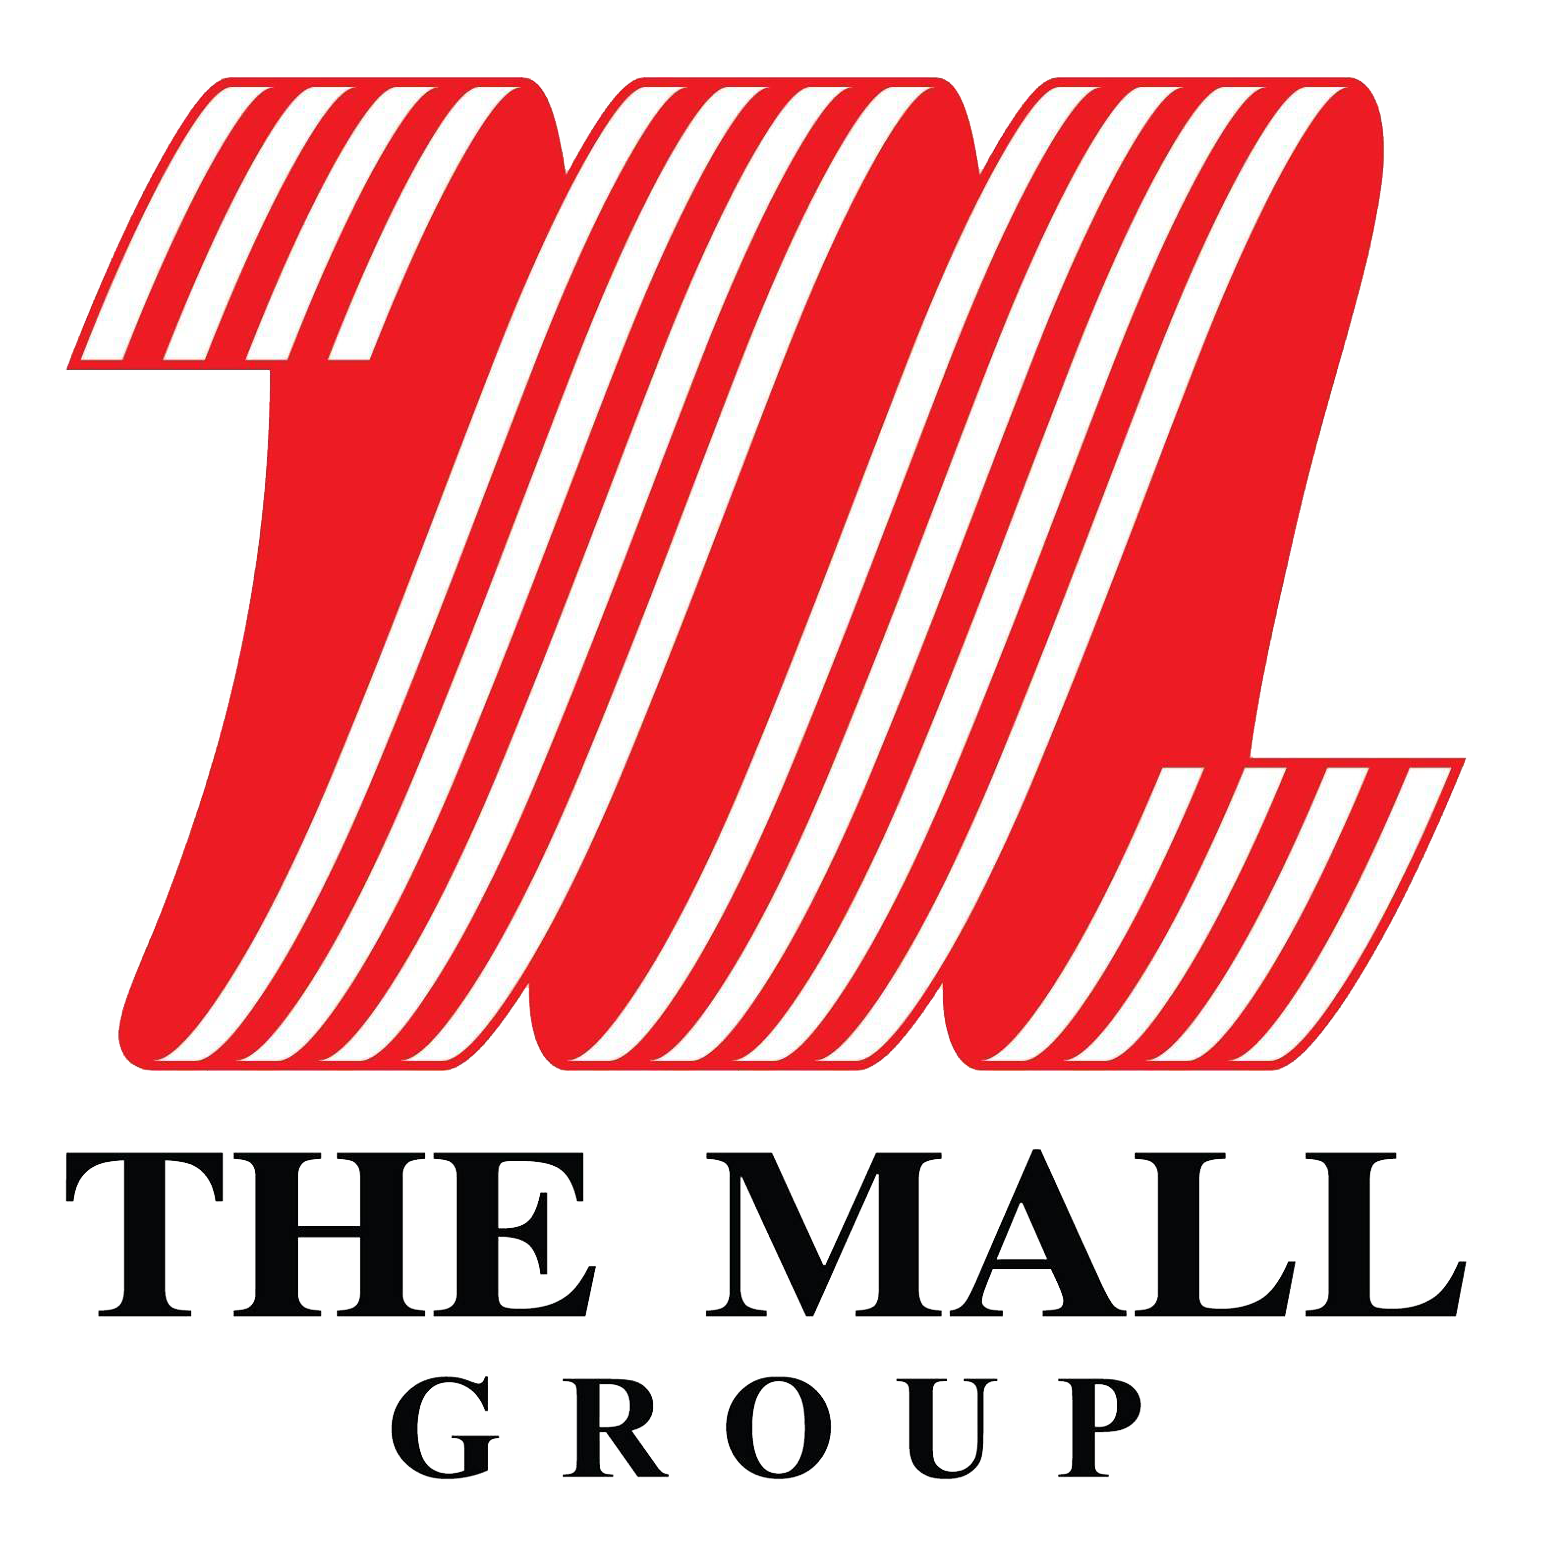 TH_themall_group2